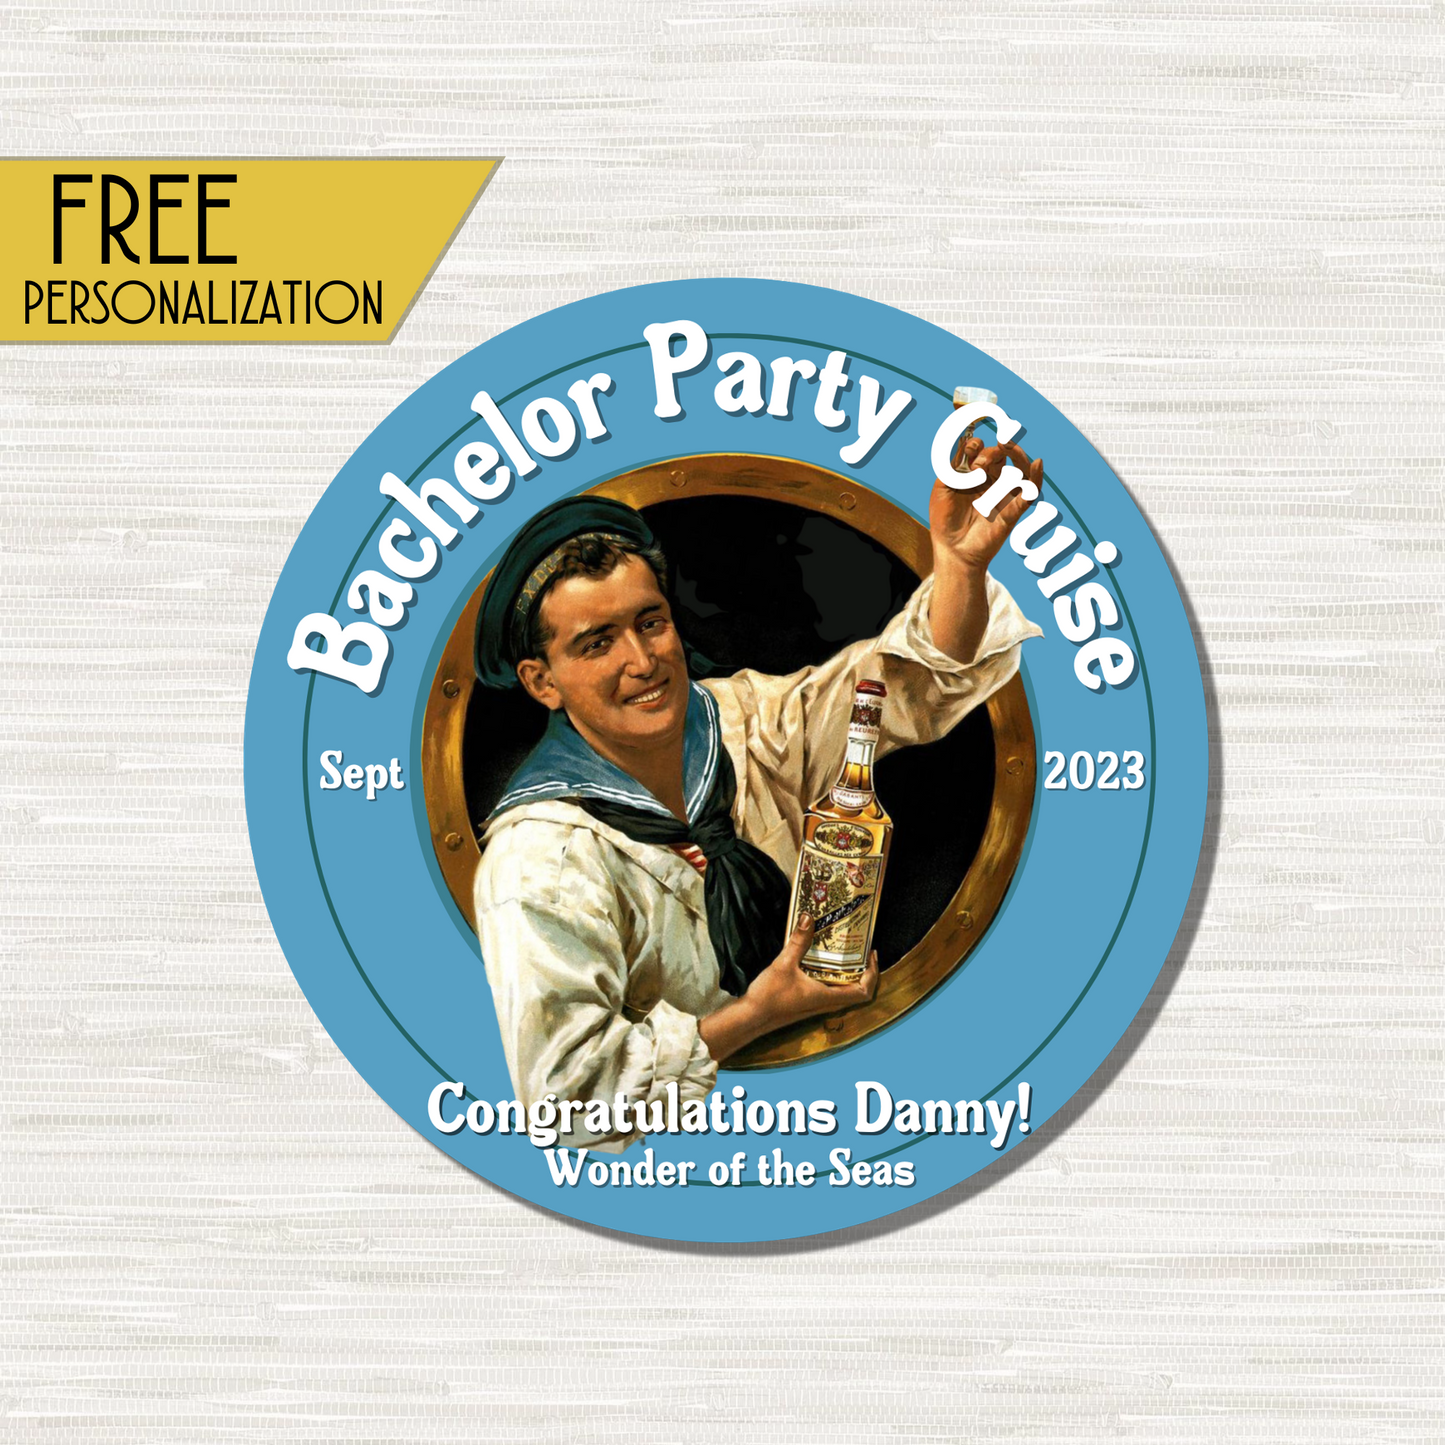 Bachelor Party Cruise - Personalized Cruise Door Magnet